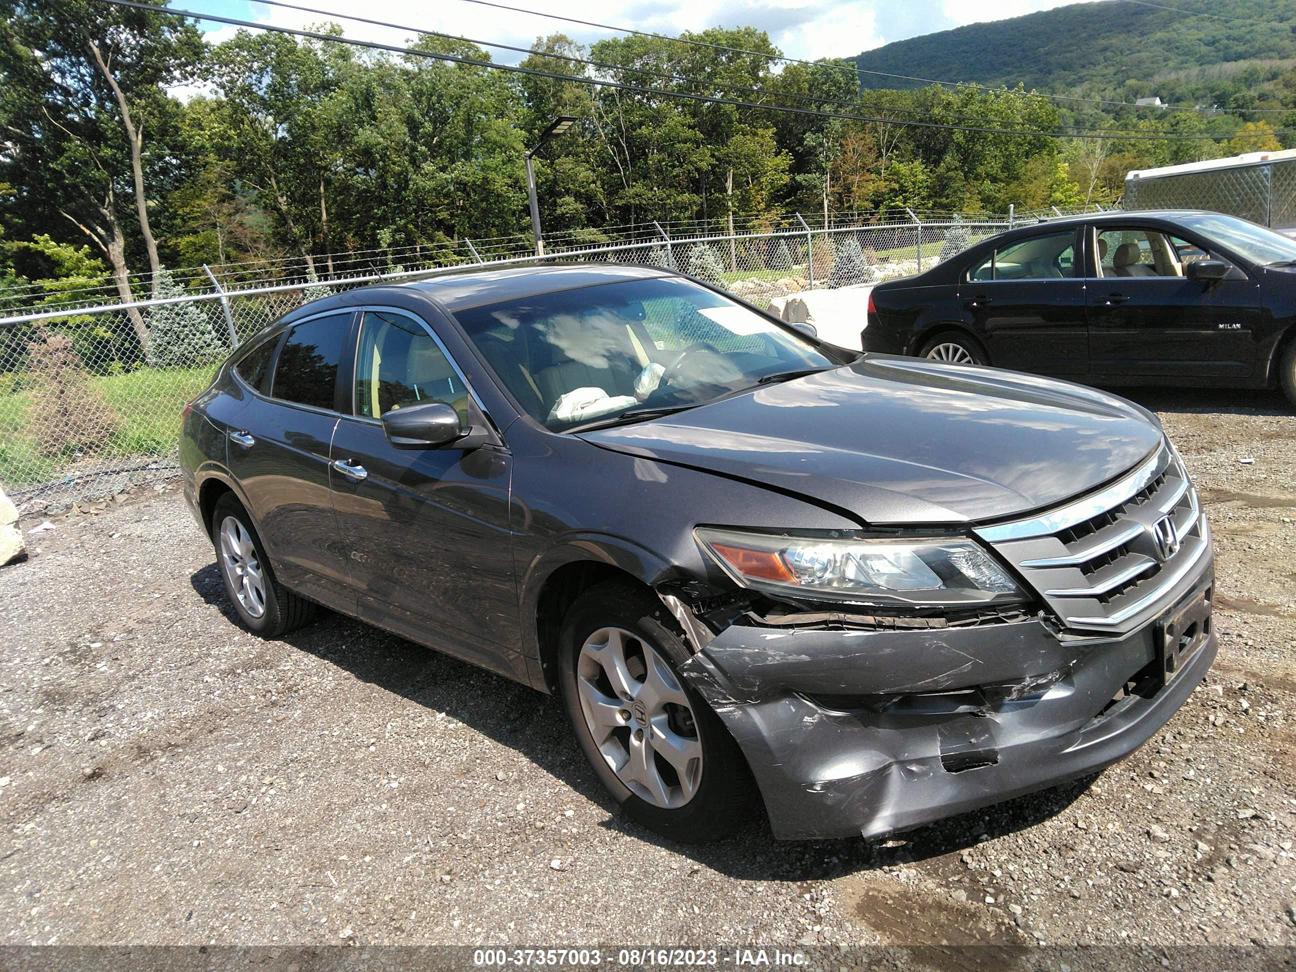 vin: 5J6TF2H5XCL000284 5J6TF2H5XCL000284 2012 honda crosstour 3500 for Sale in 07865, 985 State Route 57, Port Murray, New Jersey, USA